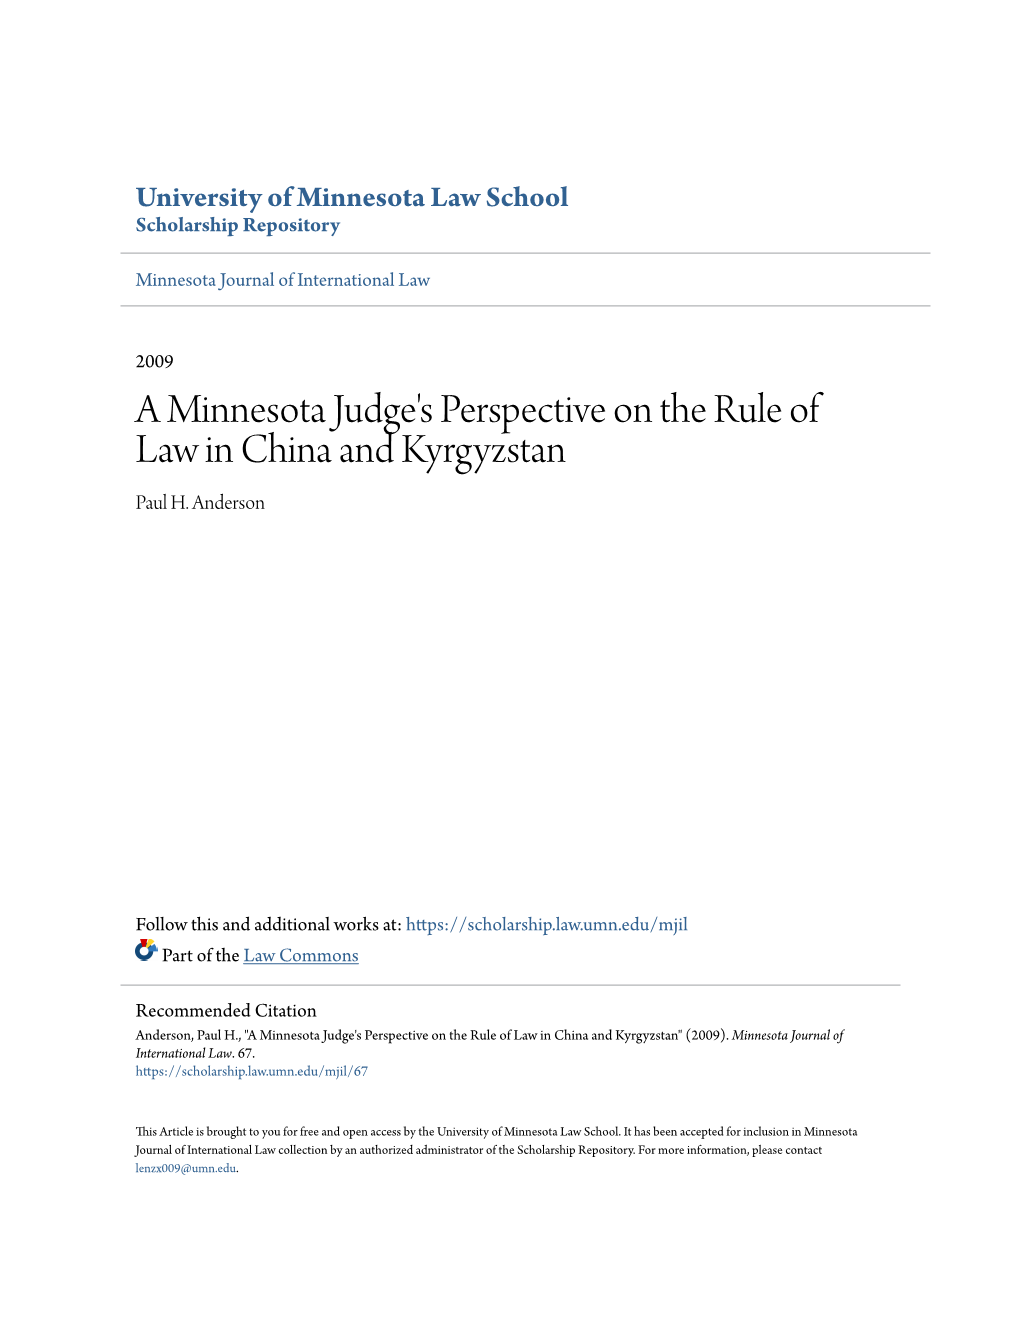 A Minnesota Judge's Perspective on the Rule of Law in China and Kyrgyzstan Paul H